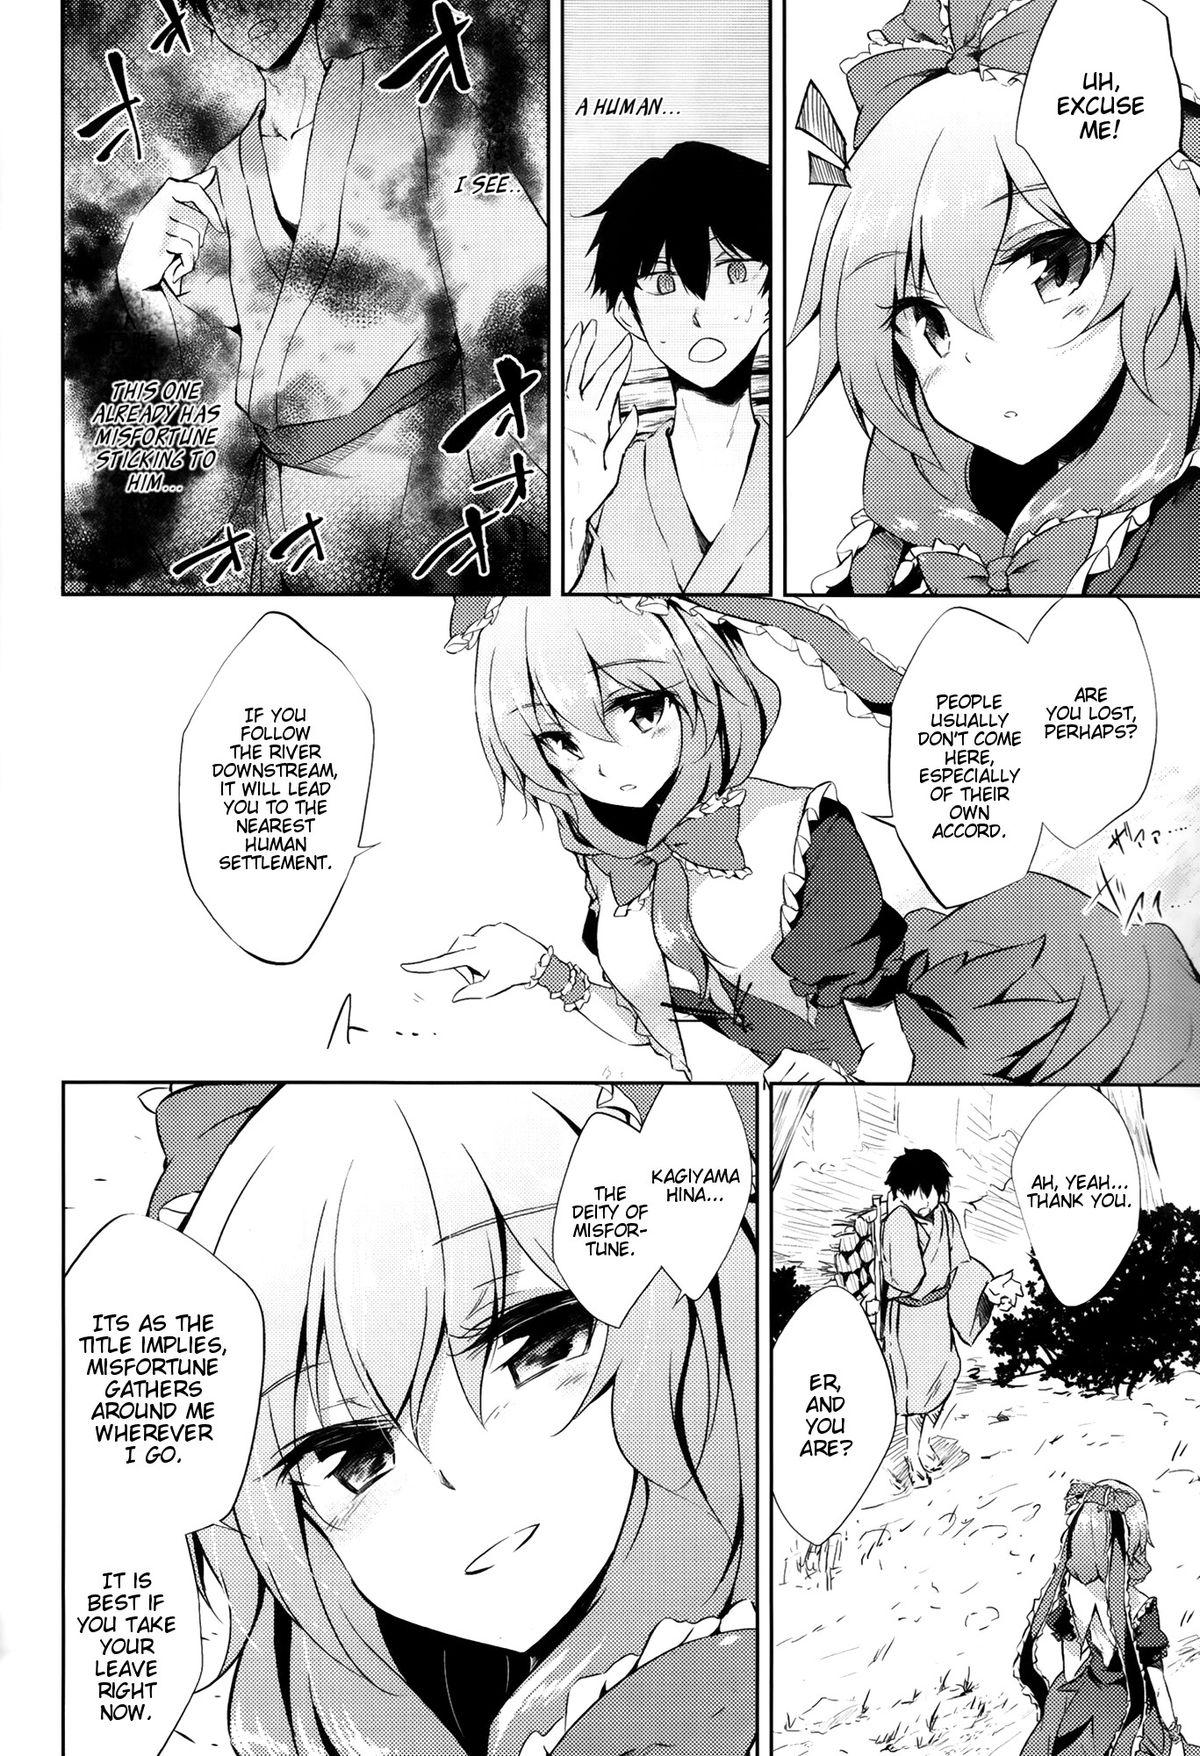 Large *Chuui* Horeru to Yakui kara | *Warning* Fall in love at your own risk - Touhou project Hotfuck - Page 4